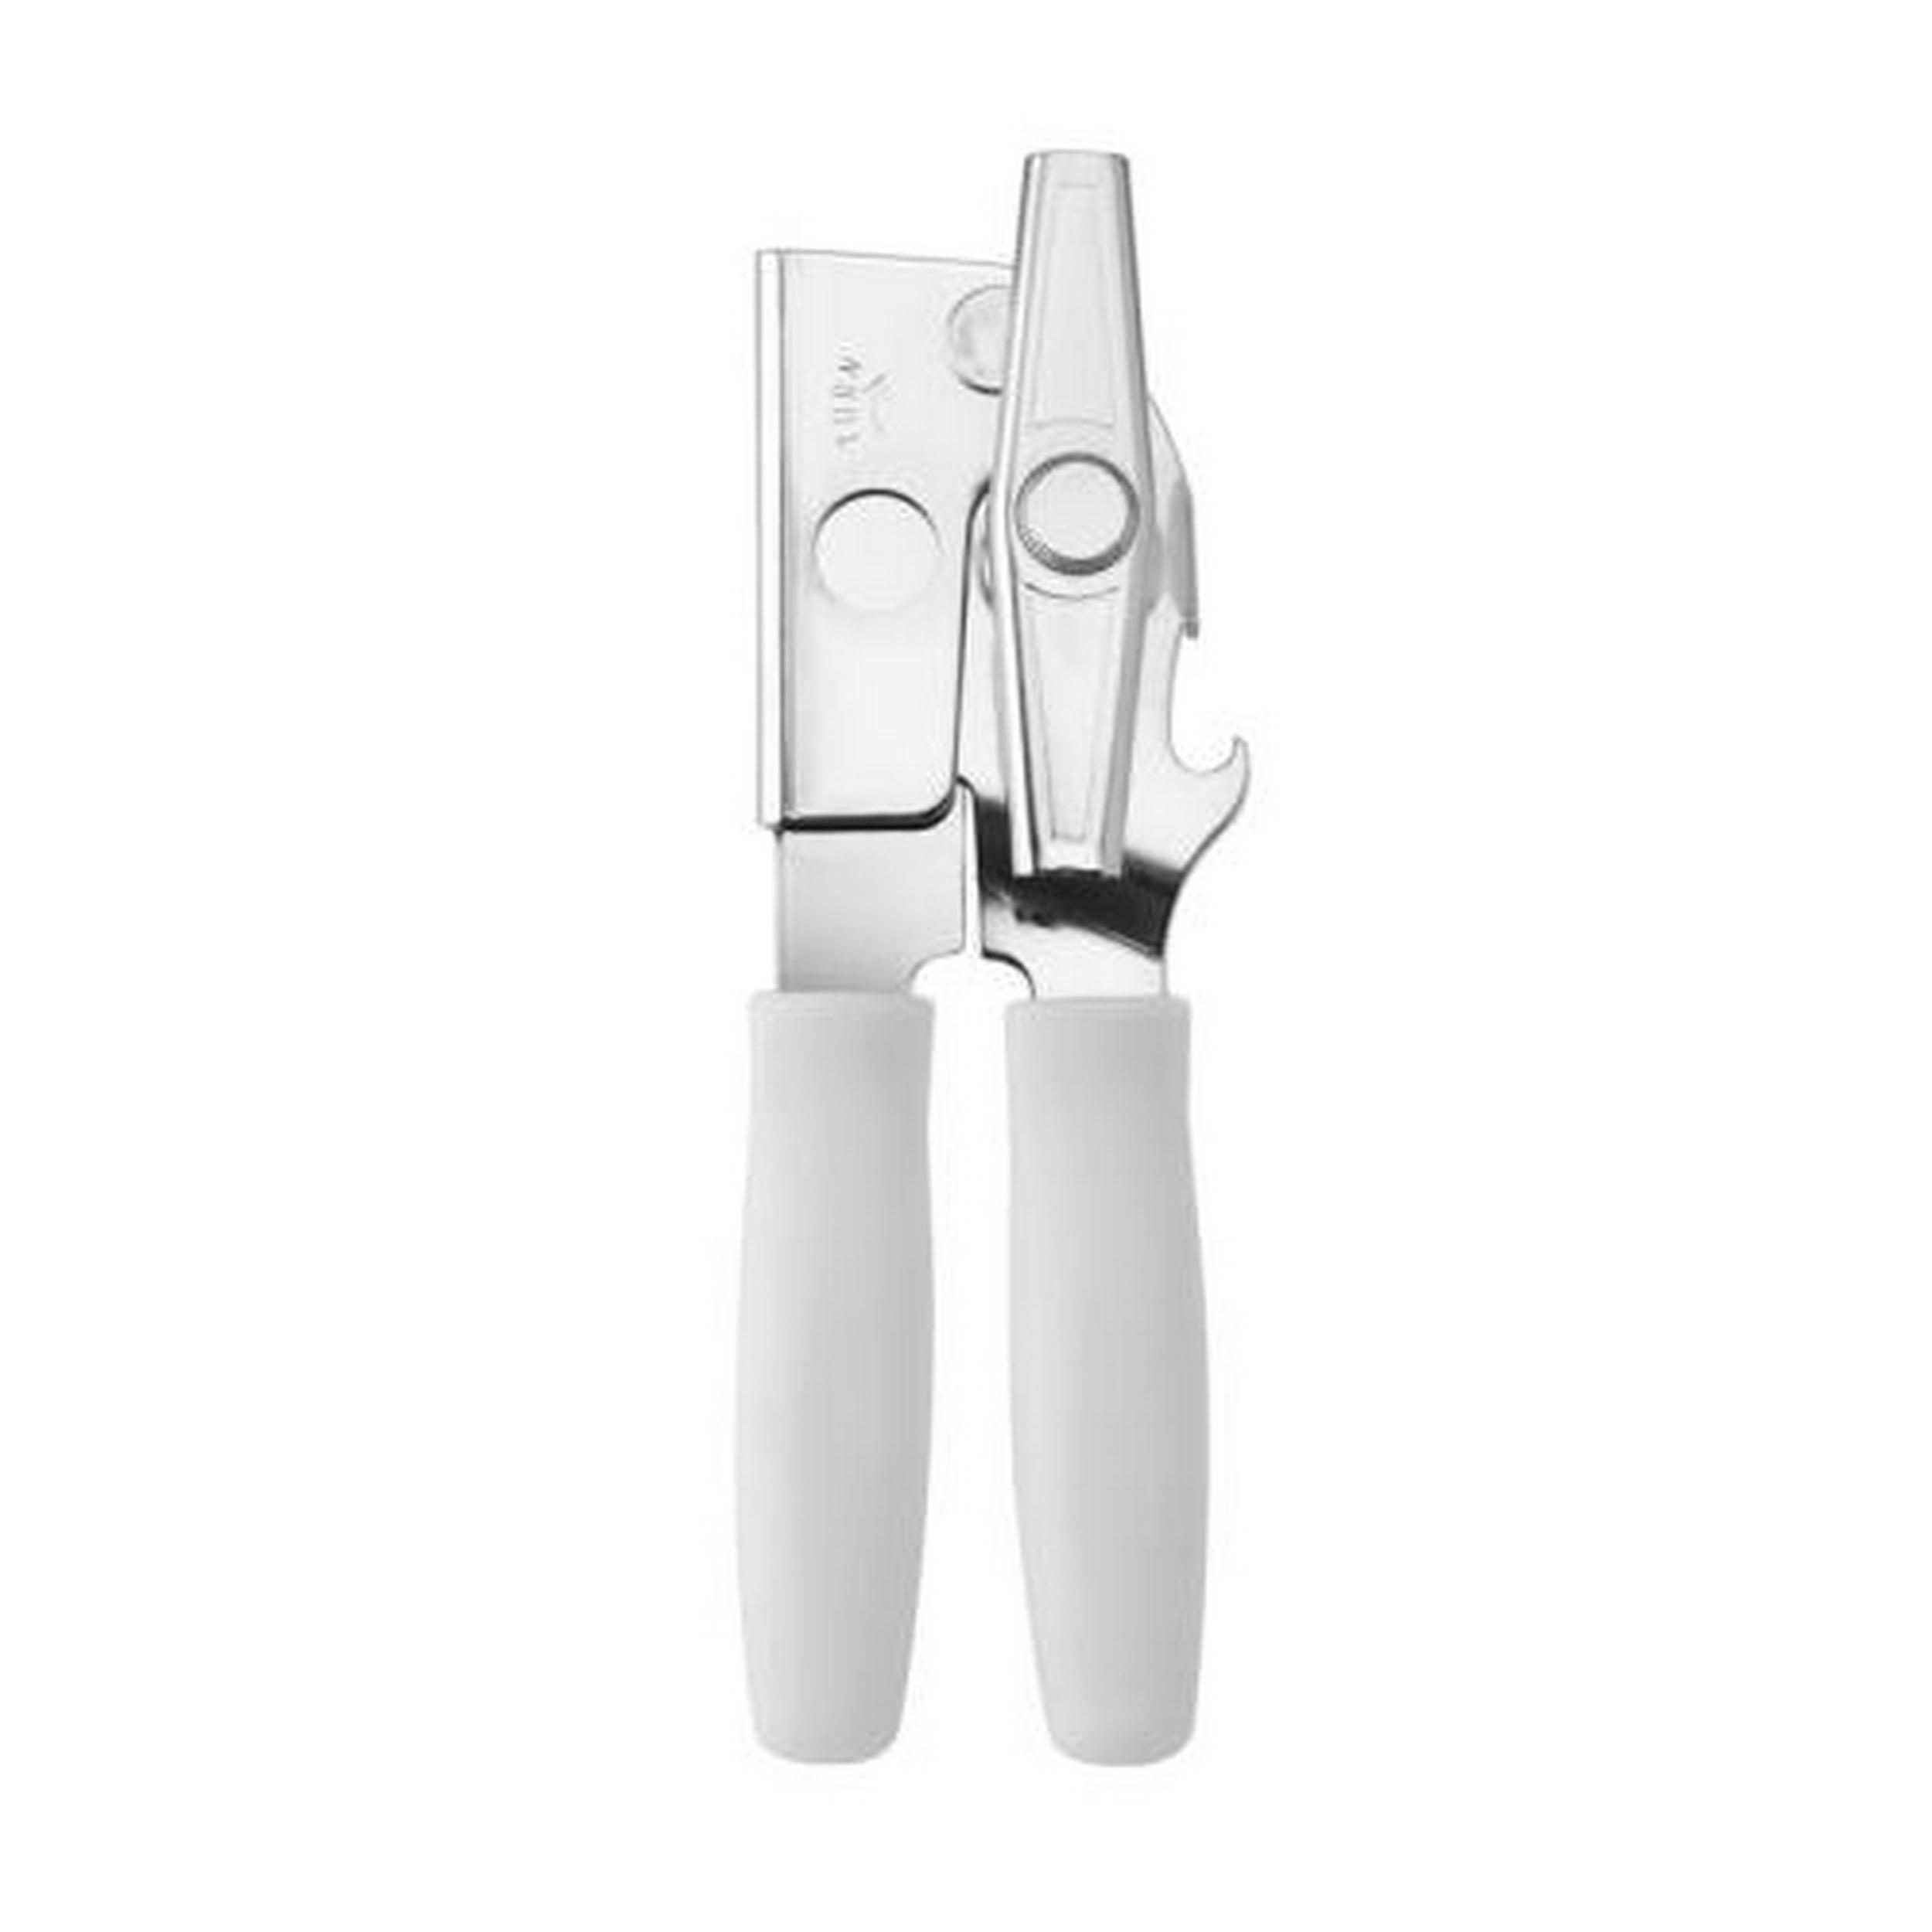 https://images.restaurantessentials.com/images/swing-a-way-407whfs-swing-a-way-hand-held-can-opener/11736-1.jpg